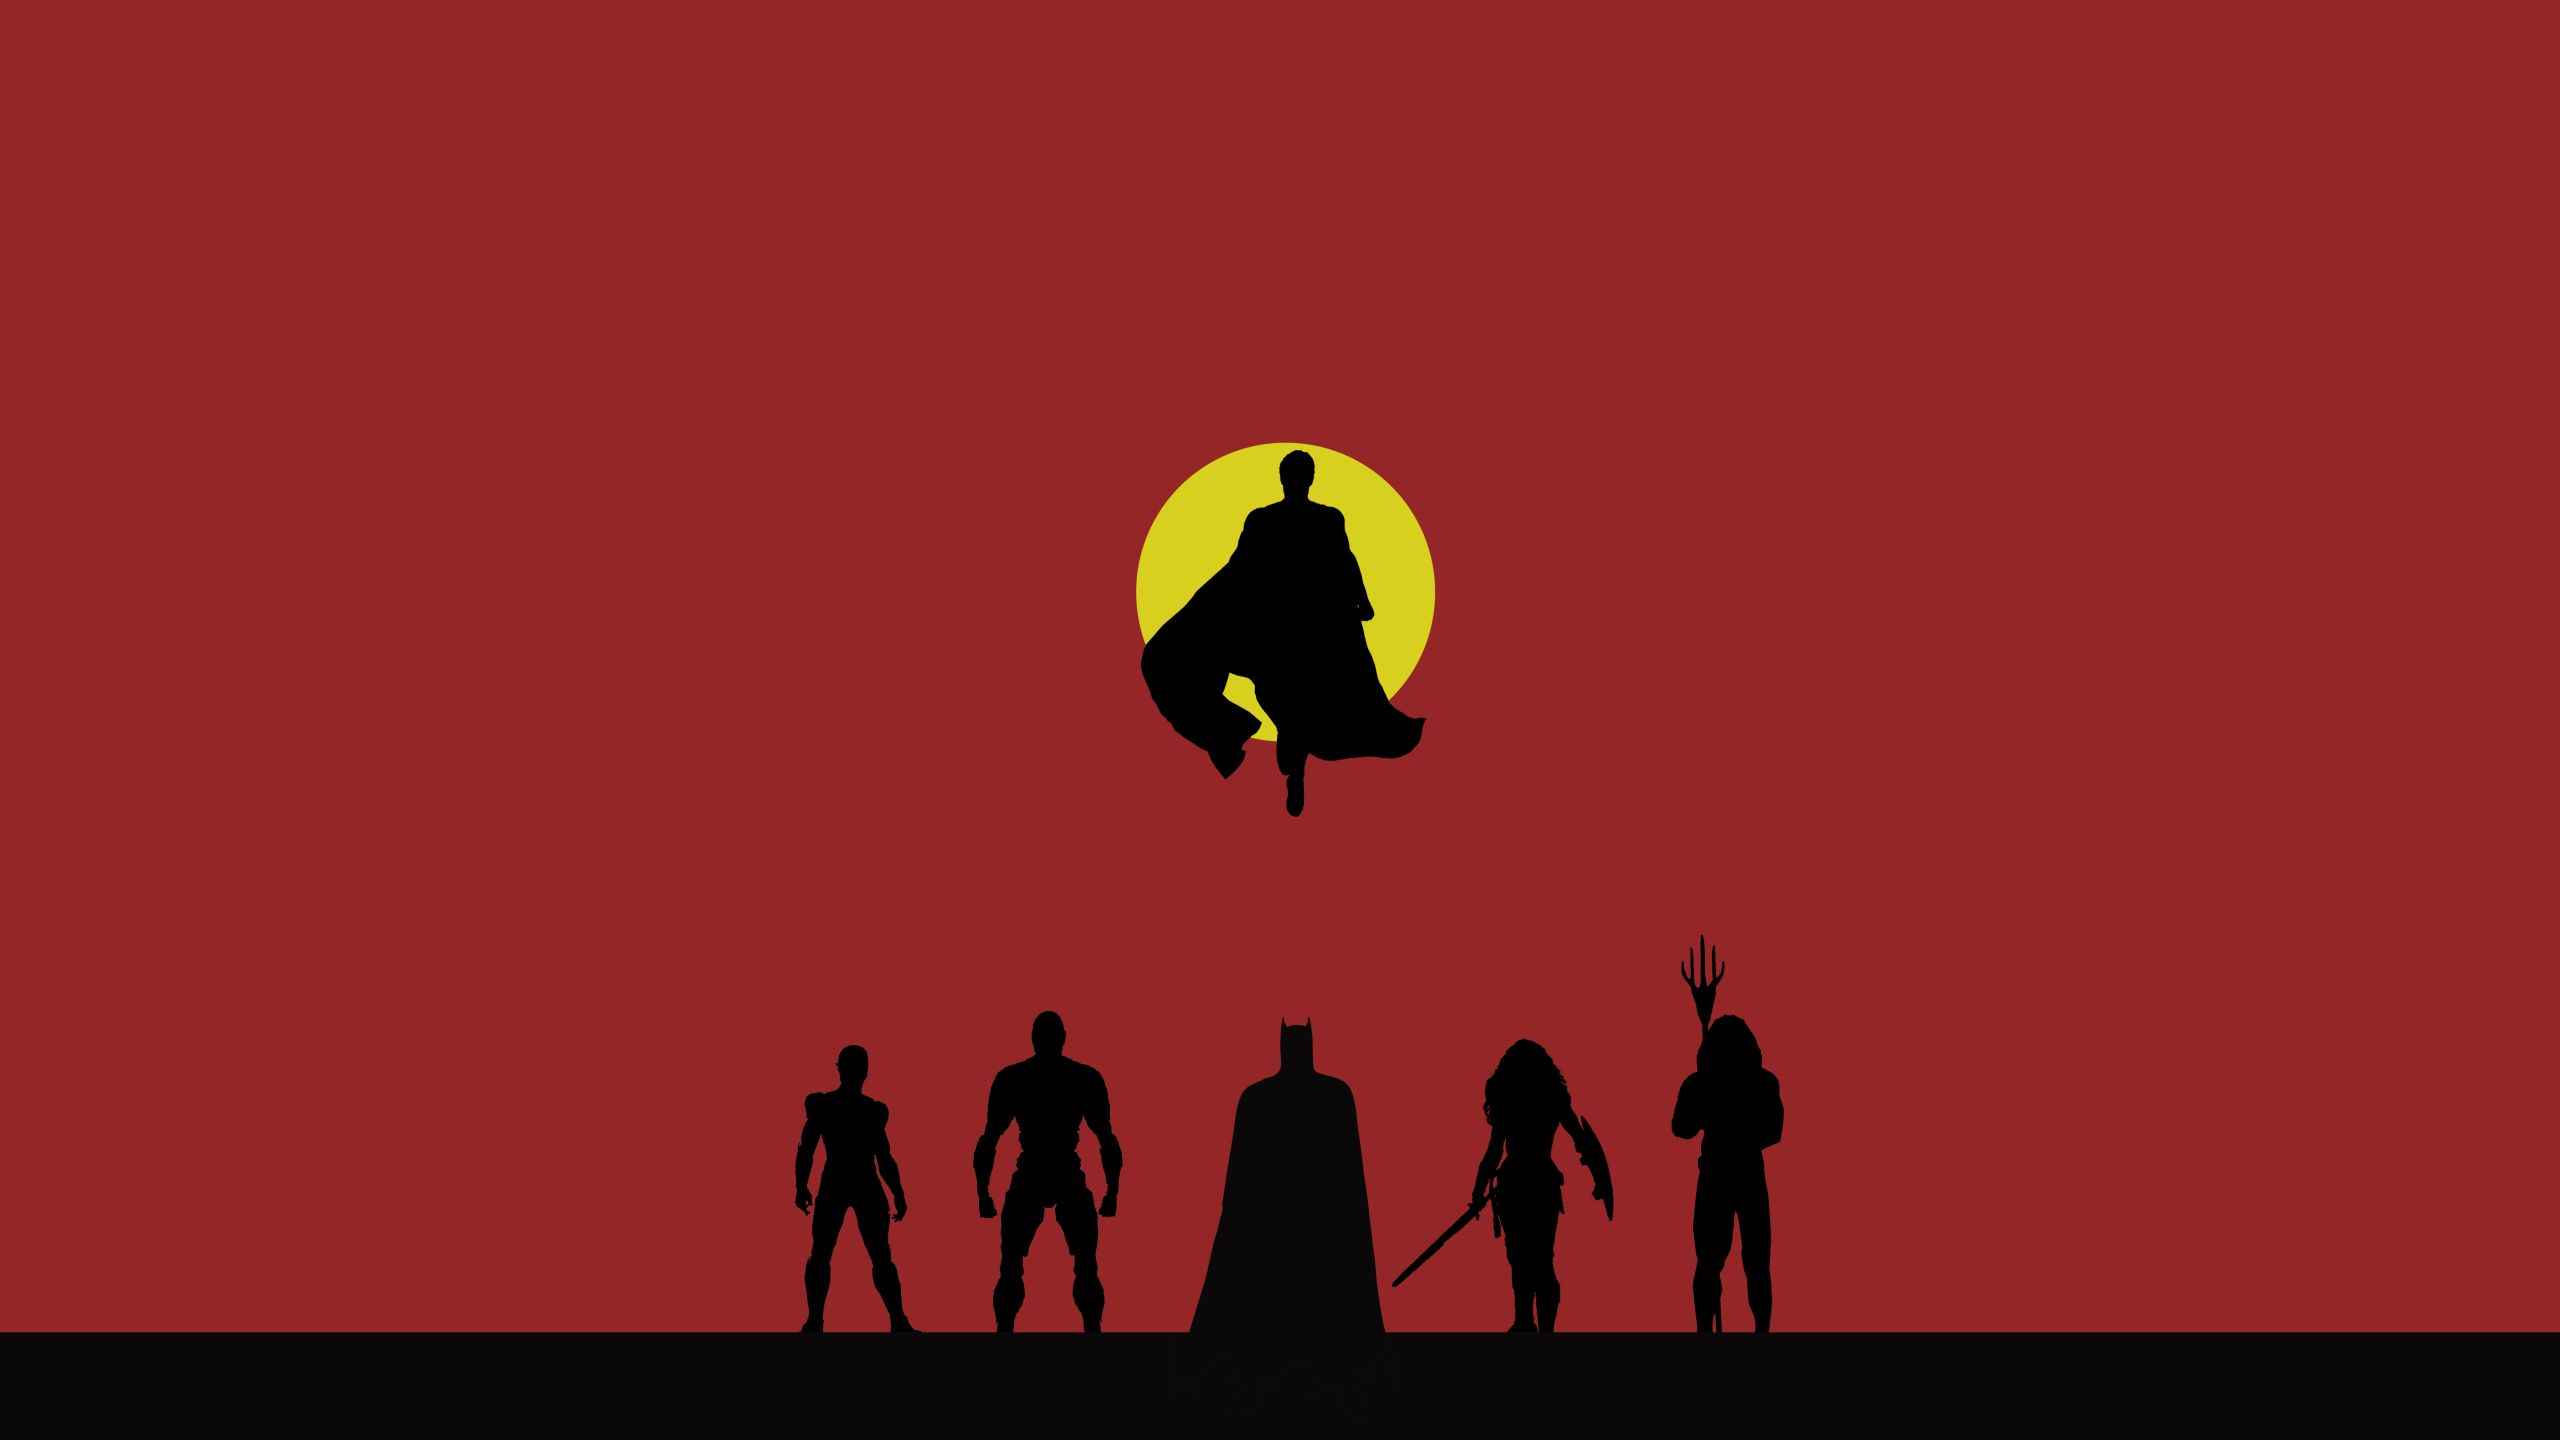 8K Justice League 2021 1440P Resolution Wallpaper, HD Minimalist 4K Wallpaper, Image, Photo and Background